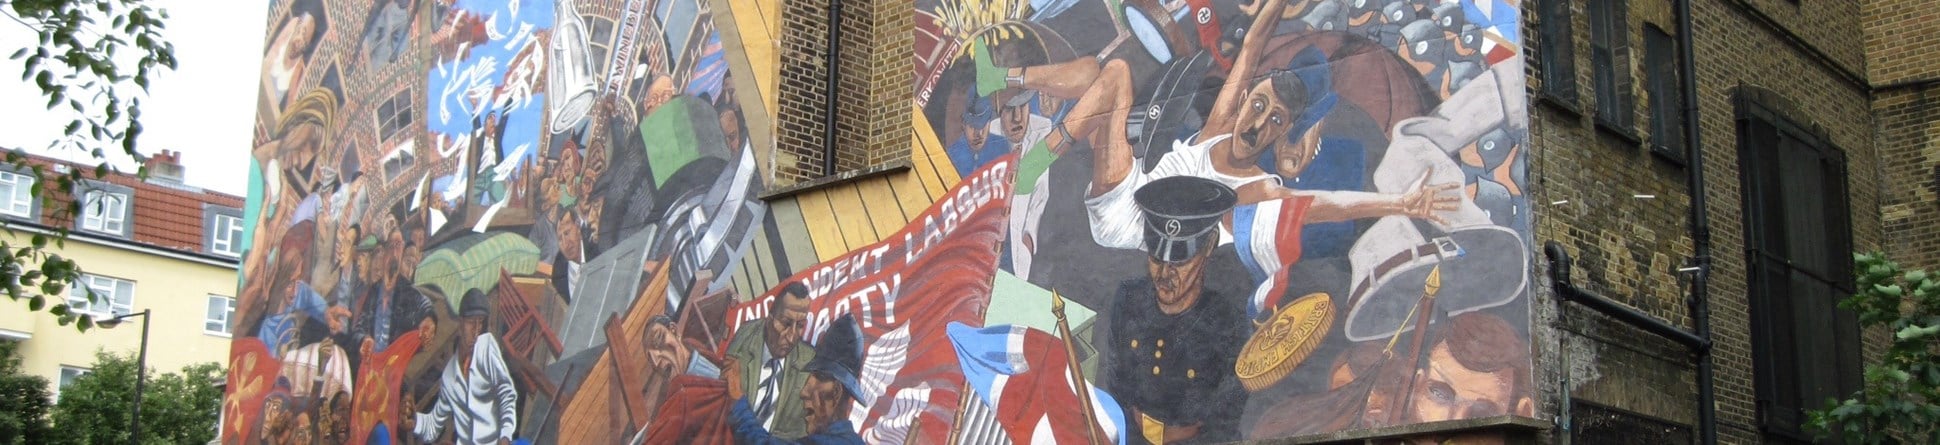 Mural on the side of a building commemorating the Battle of Cable Street